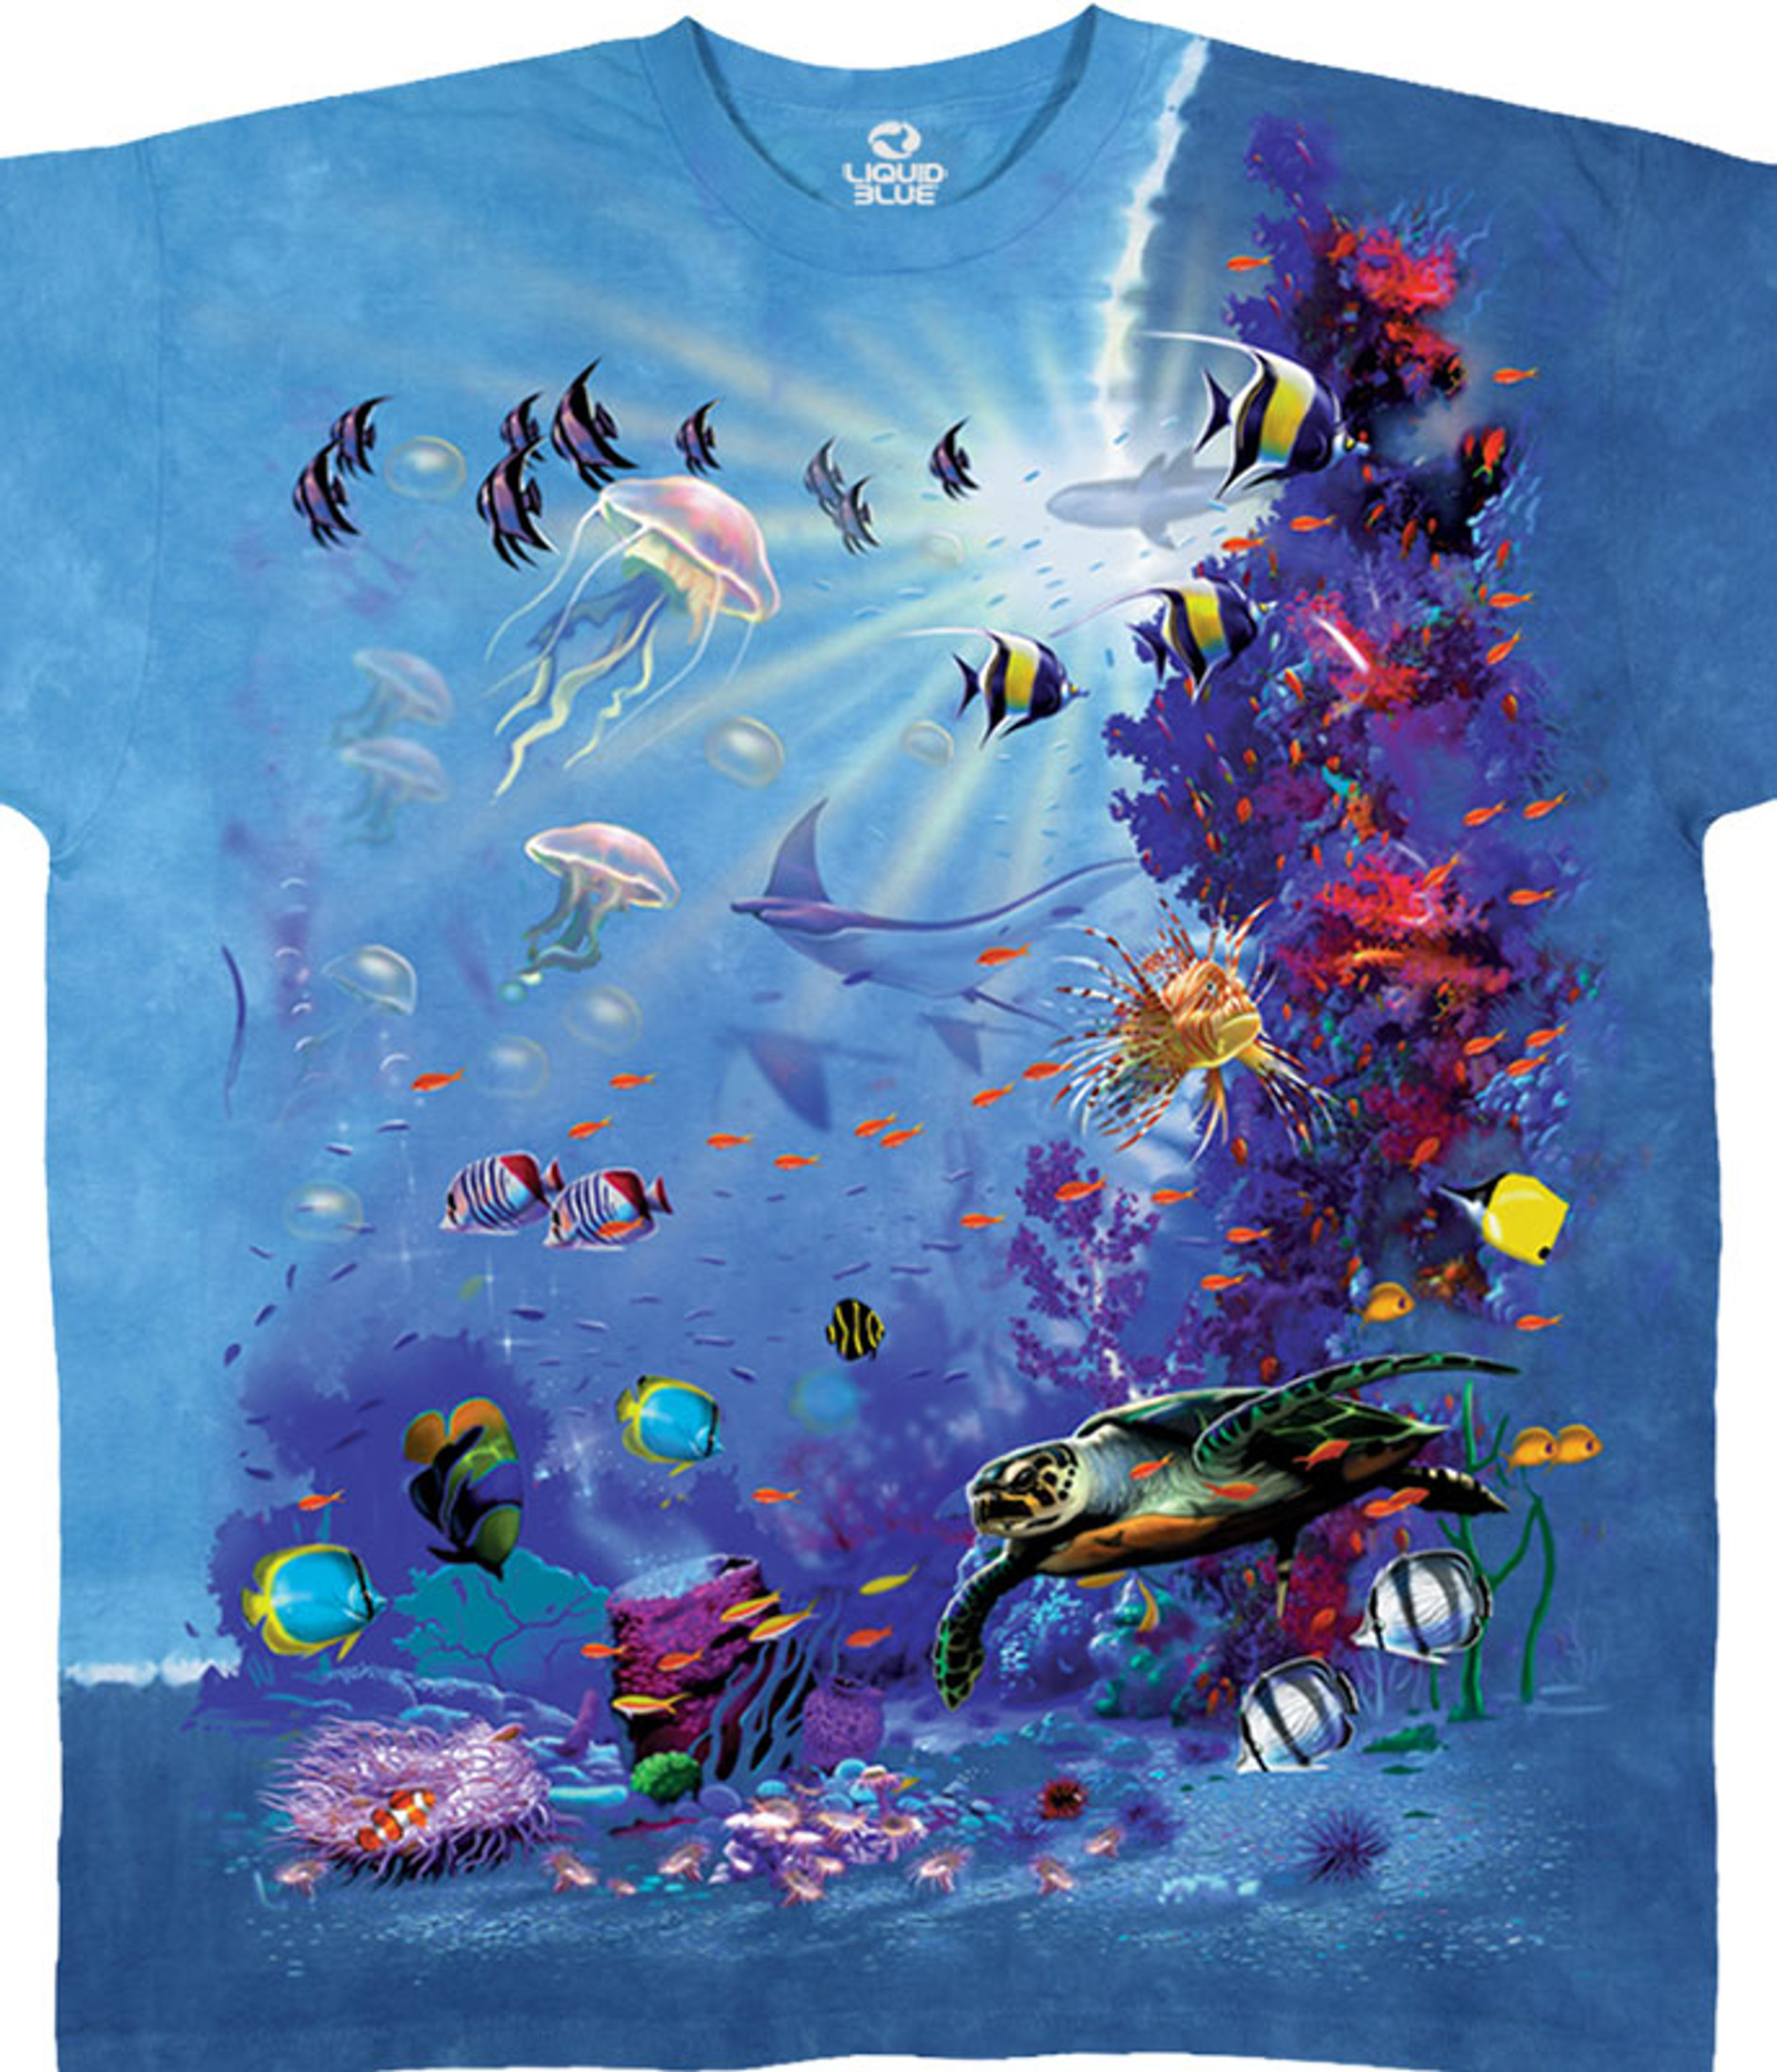 The World's Best Tie-Dyes T-Shirts Tees - Liquid Blue